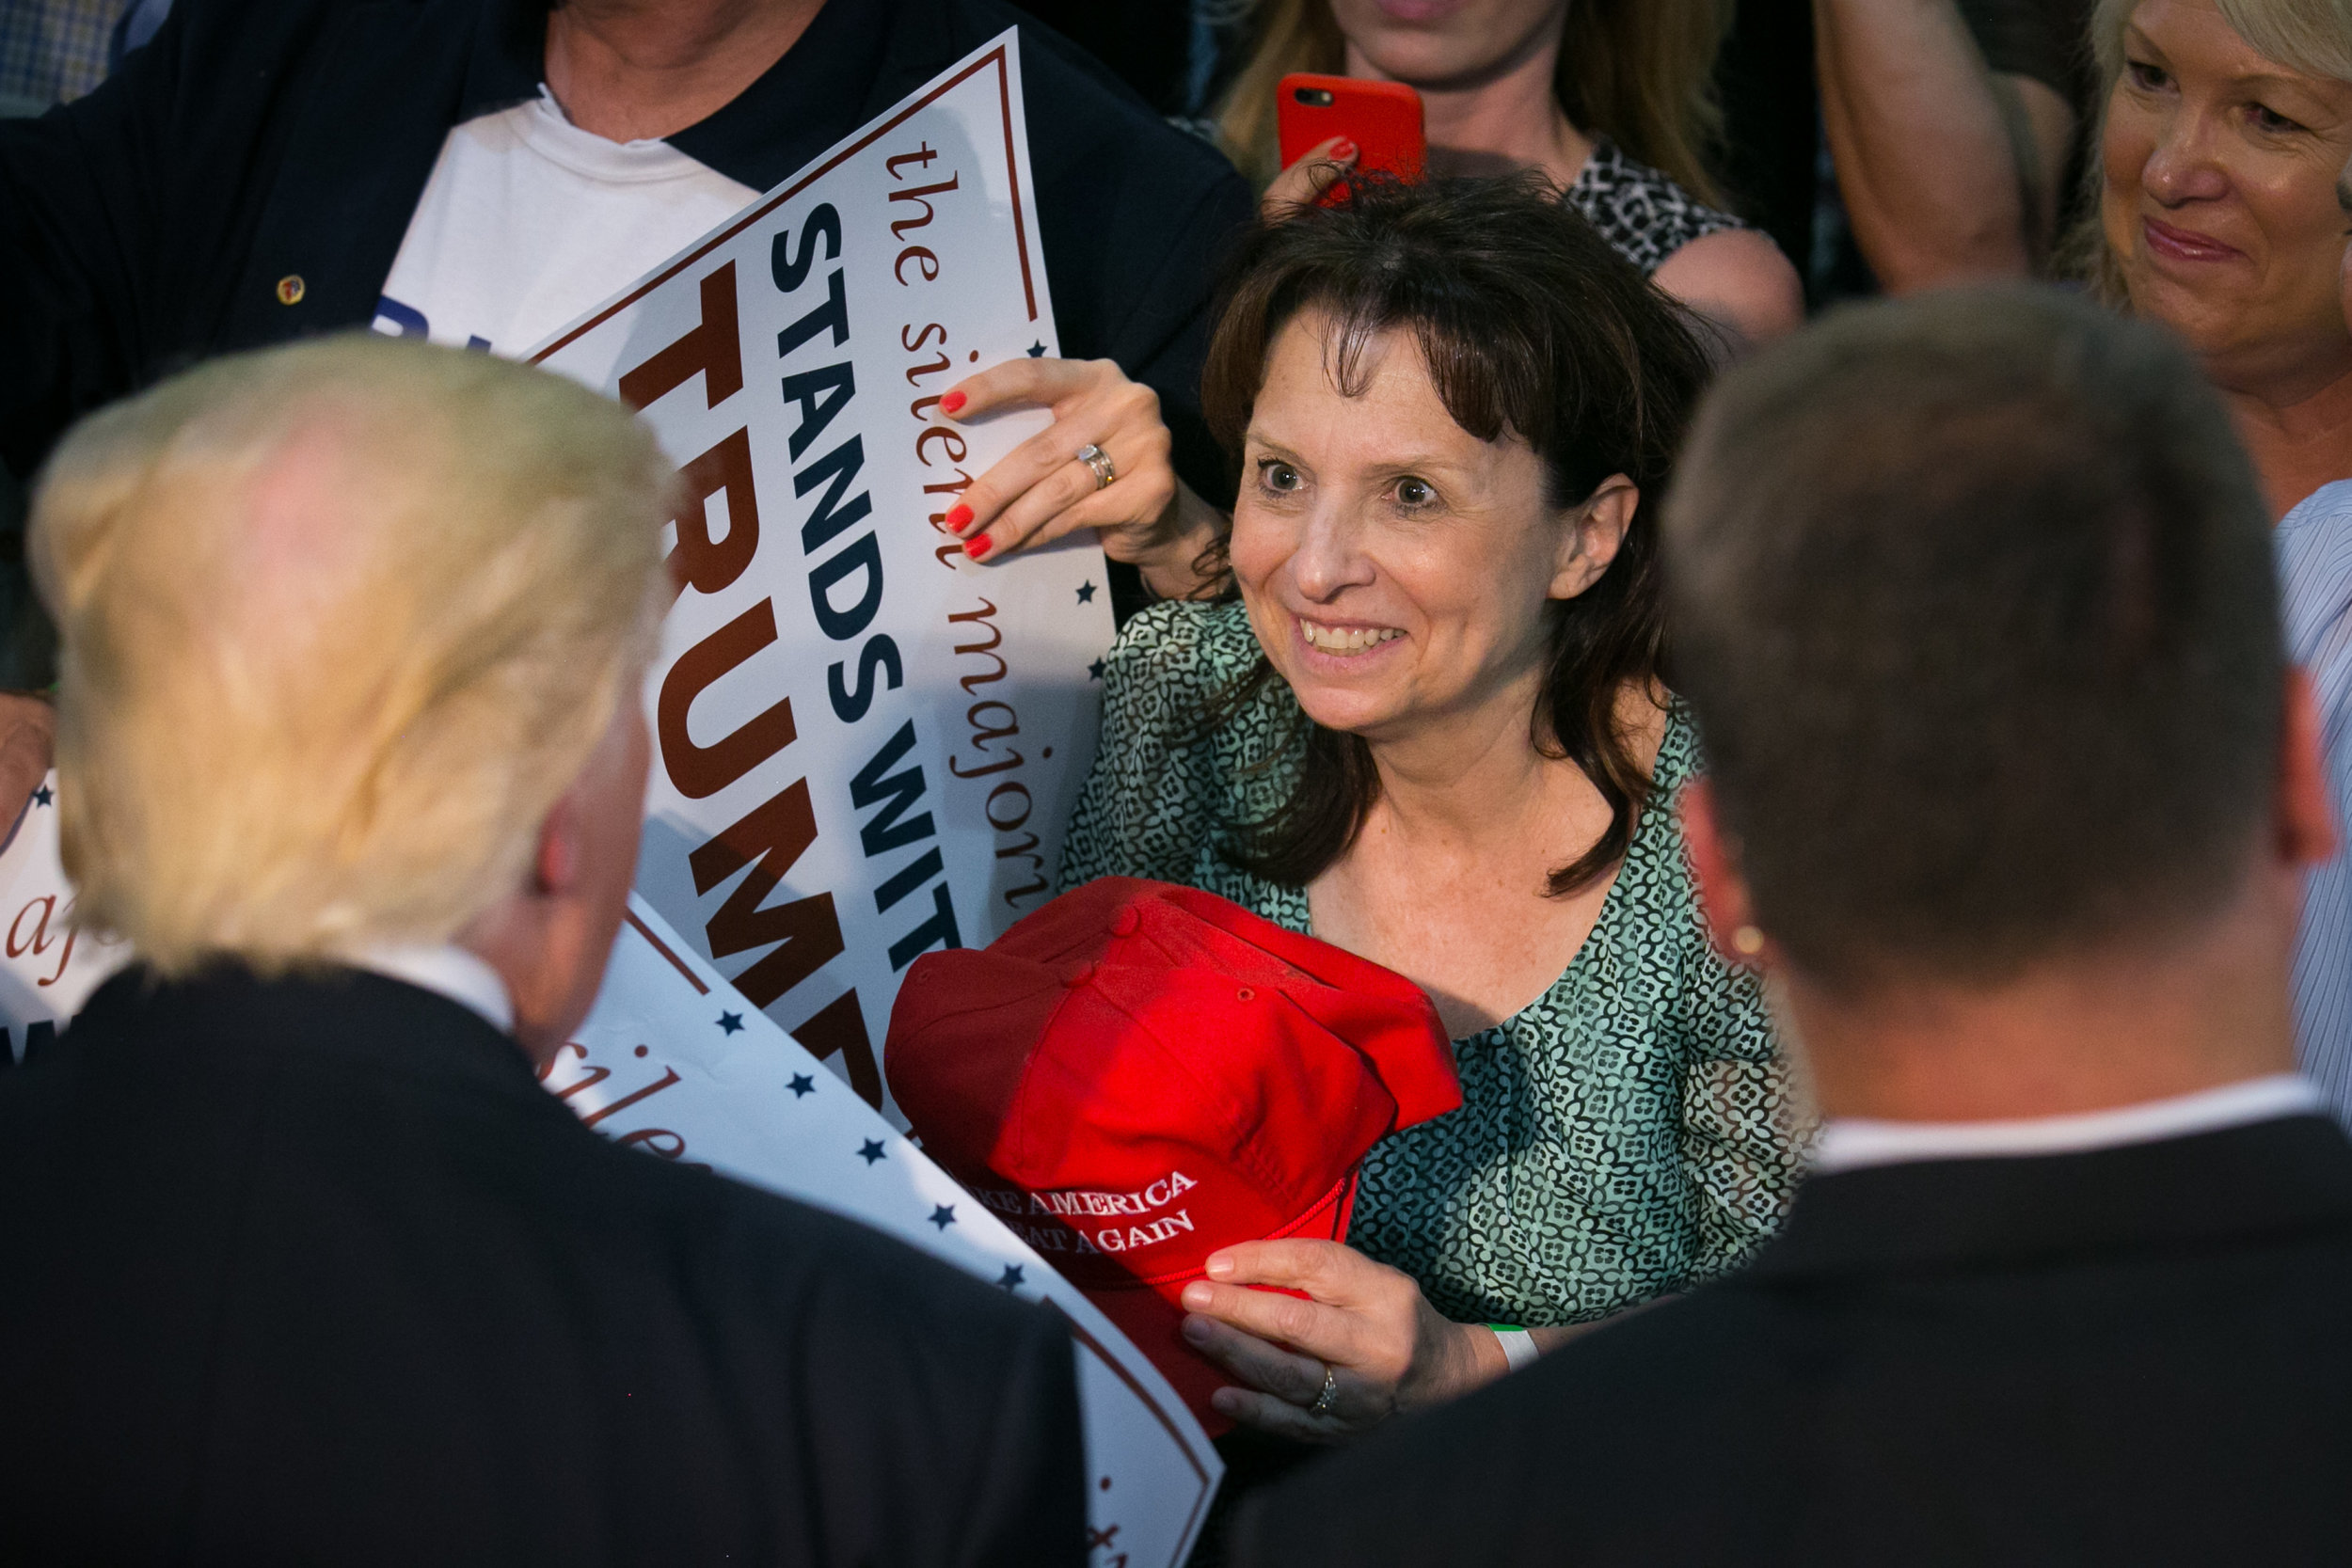  A supporter reacts to meeting Donald Trump at a campaign stop in San Jose, California 